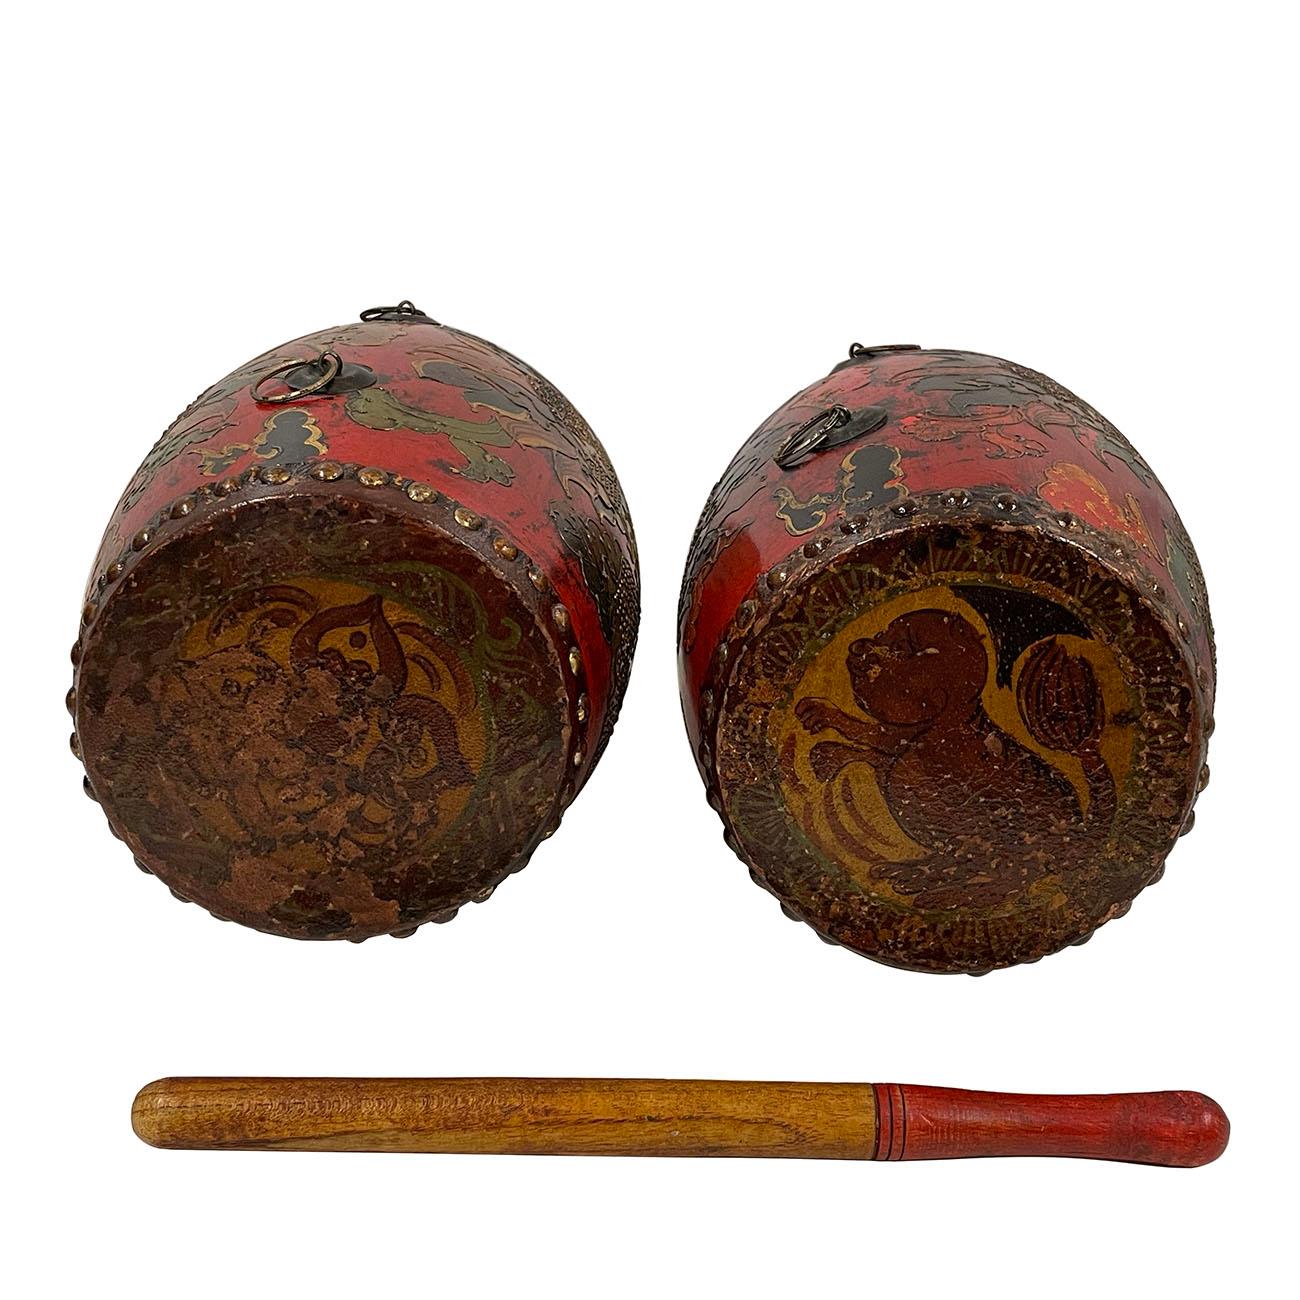 Leather Early 20th Century Antique Tibetan Hand Painted Dragon Drums, 3 Pieces Set For Sale